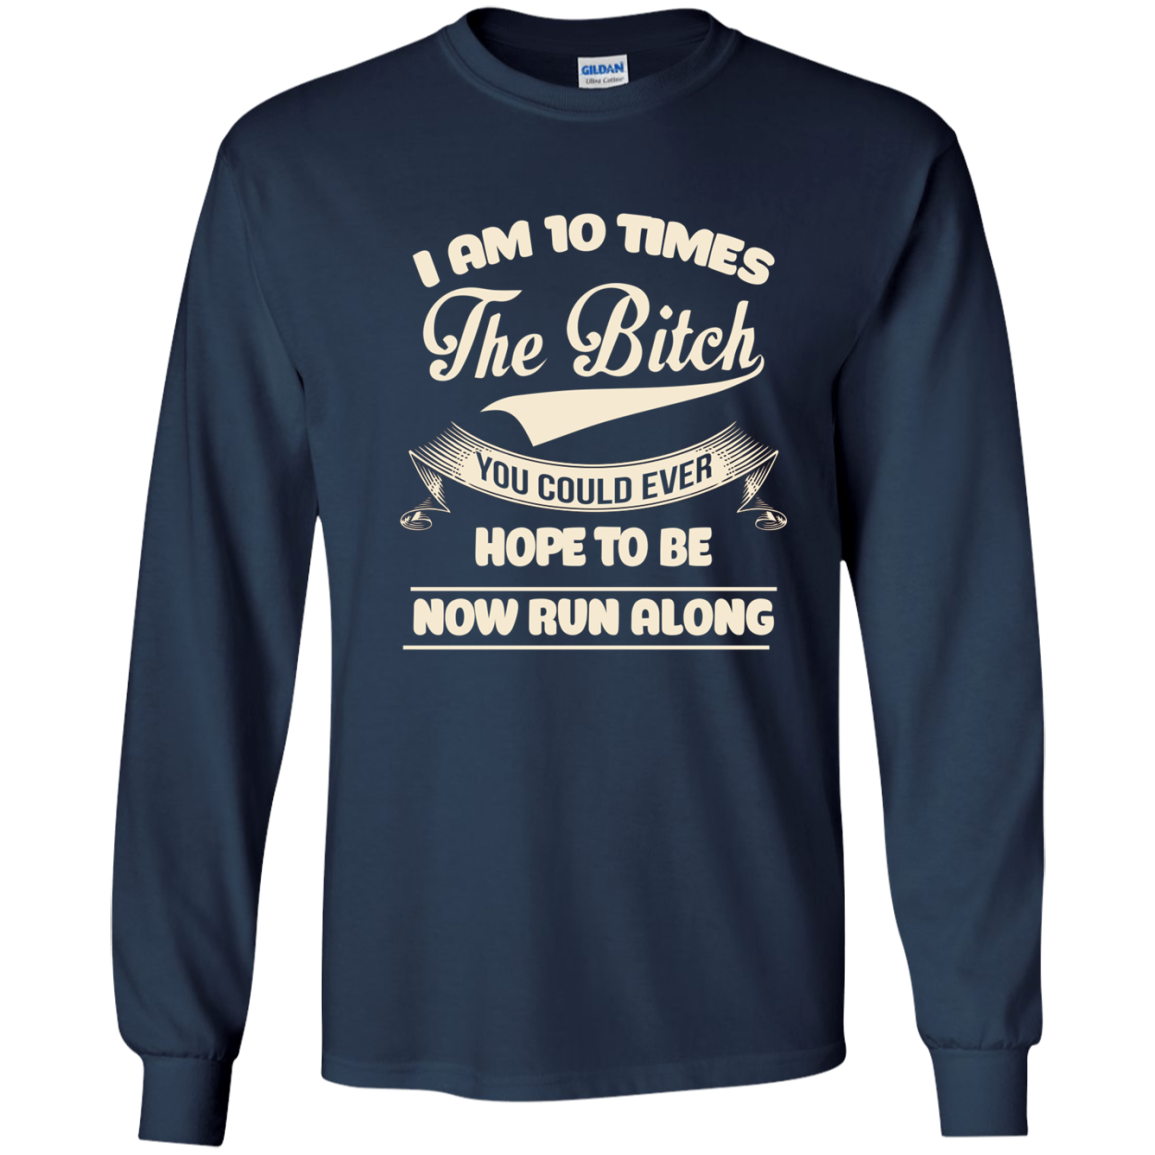 I am 10 time the bitch you could ever hope to be now run along shirt,